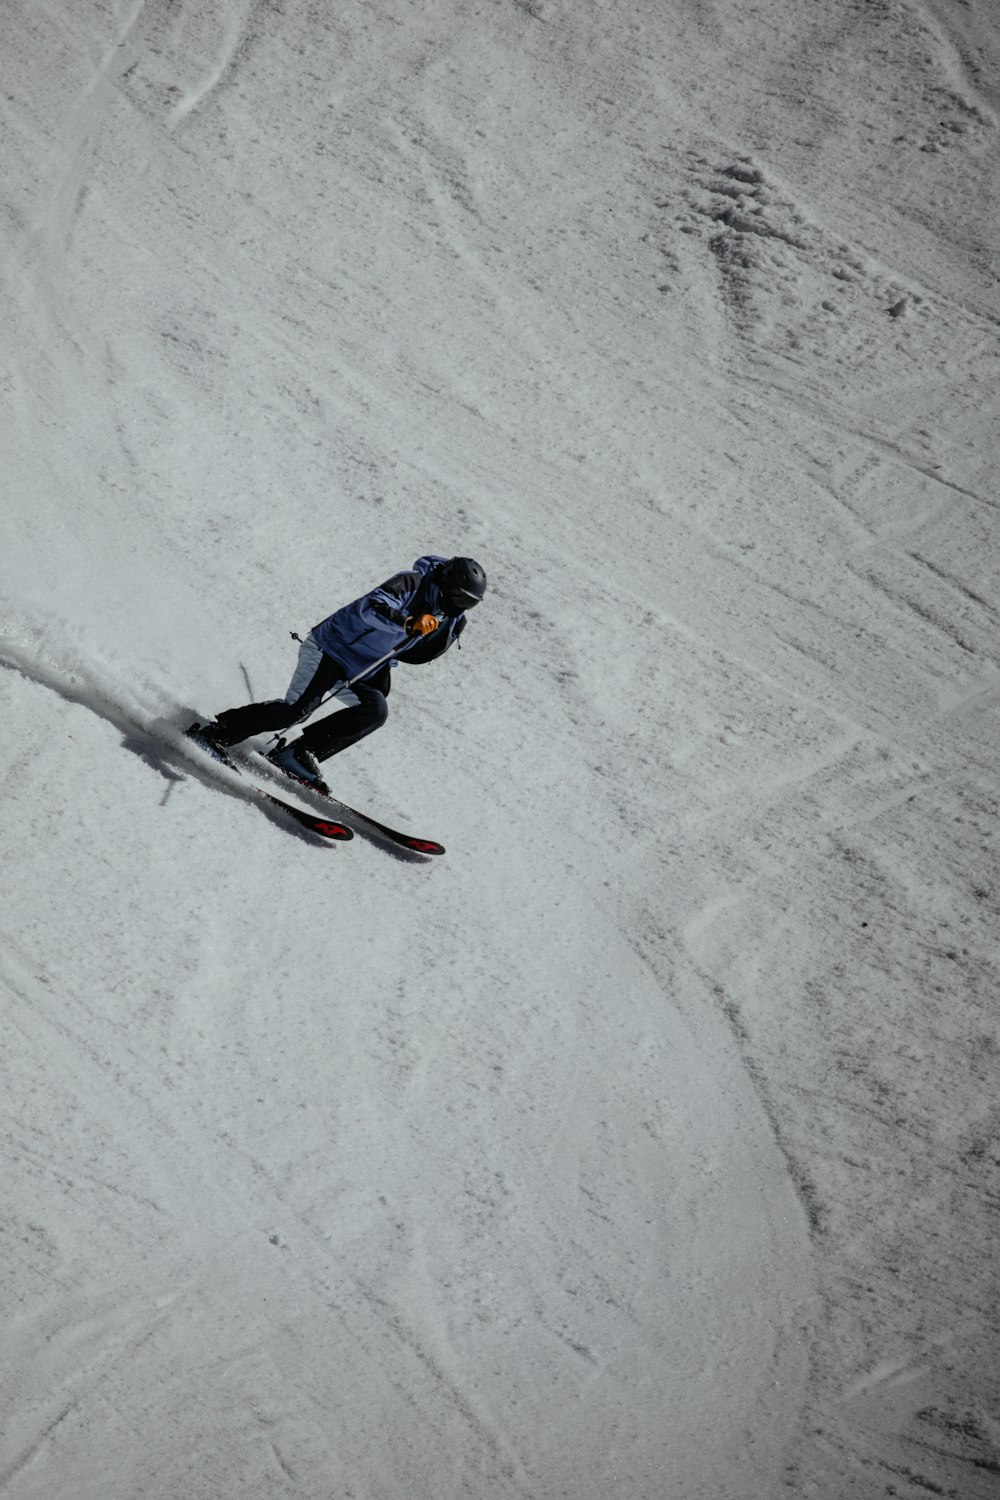 man in blue jacket and black pants riding snowboard on snow covered ground during daytime